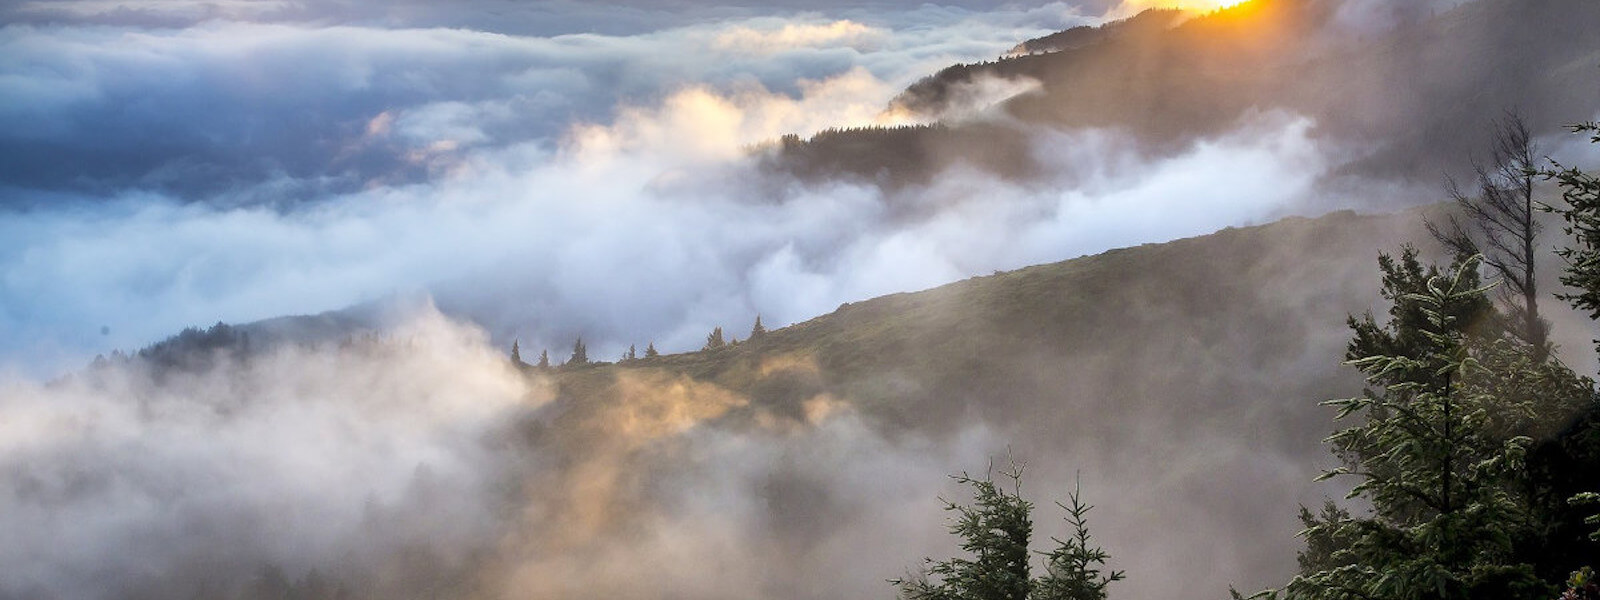 Clouds embracing the hills up in the mountains during sunrise.